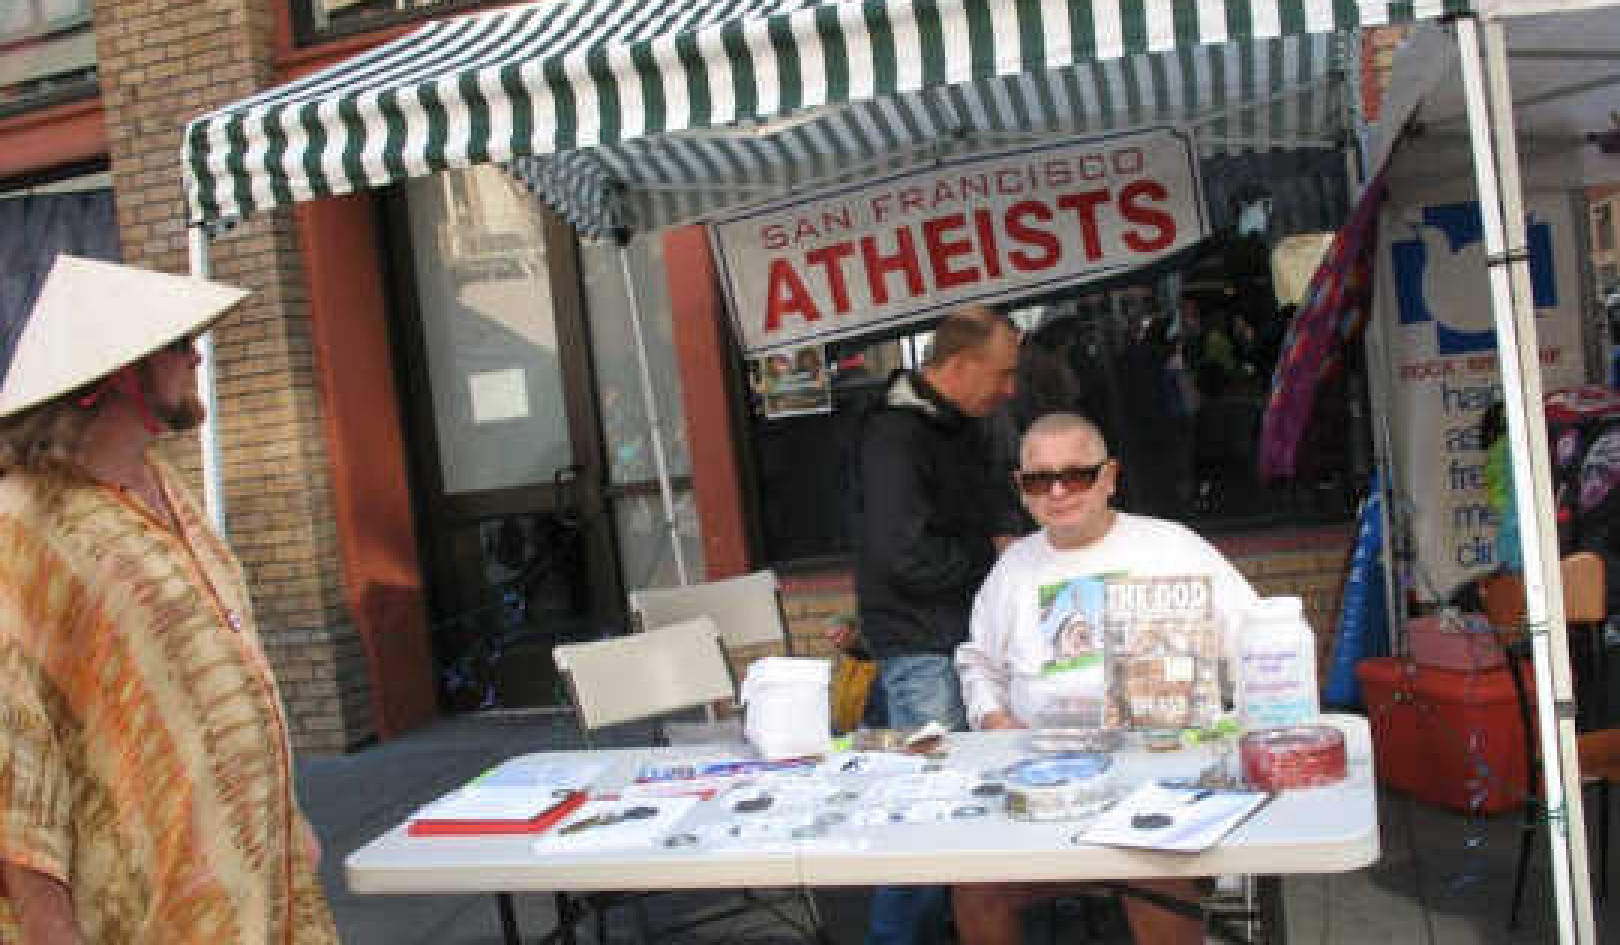 Why Some People Distrust Atheists